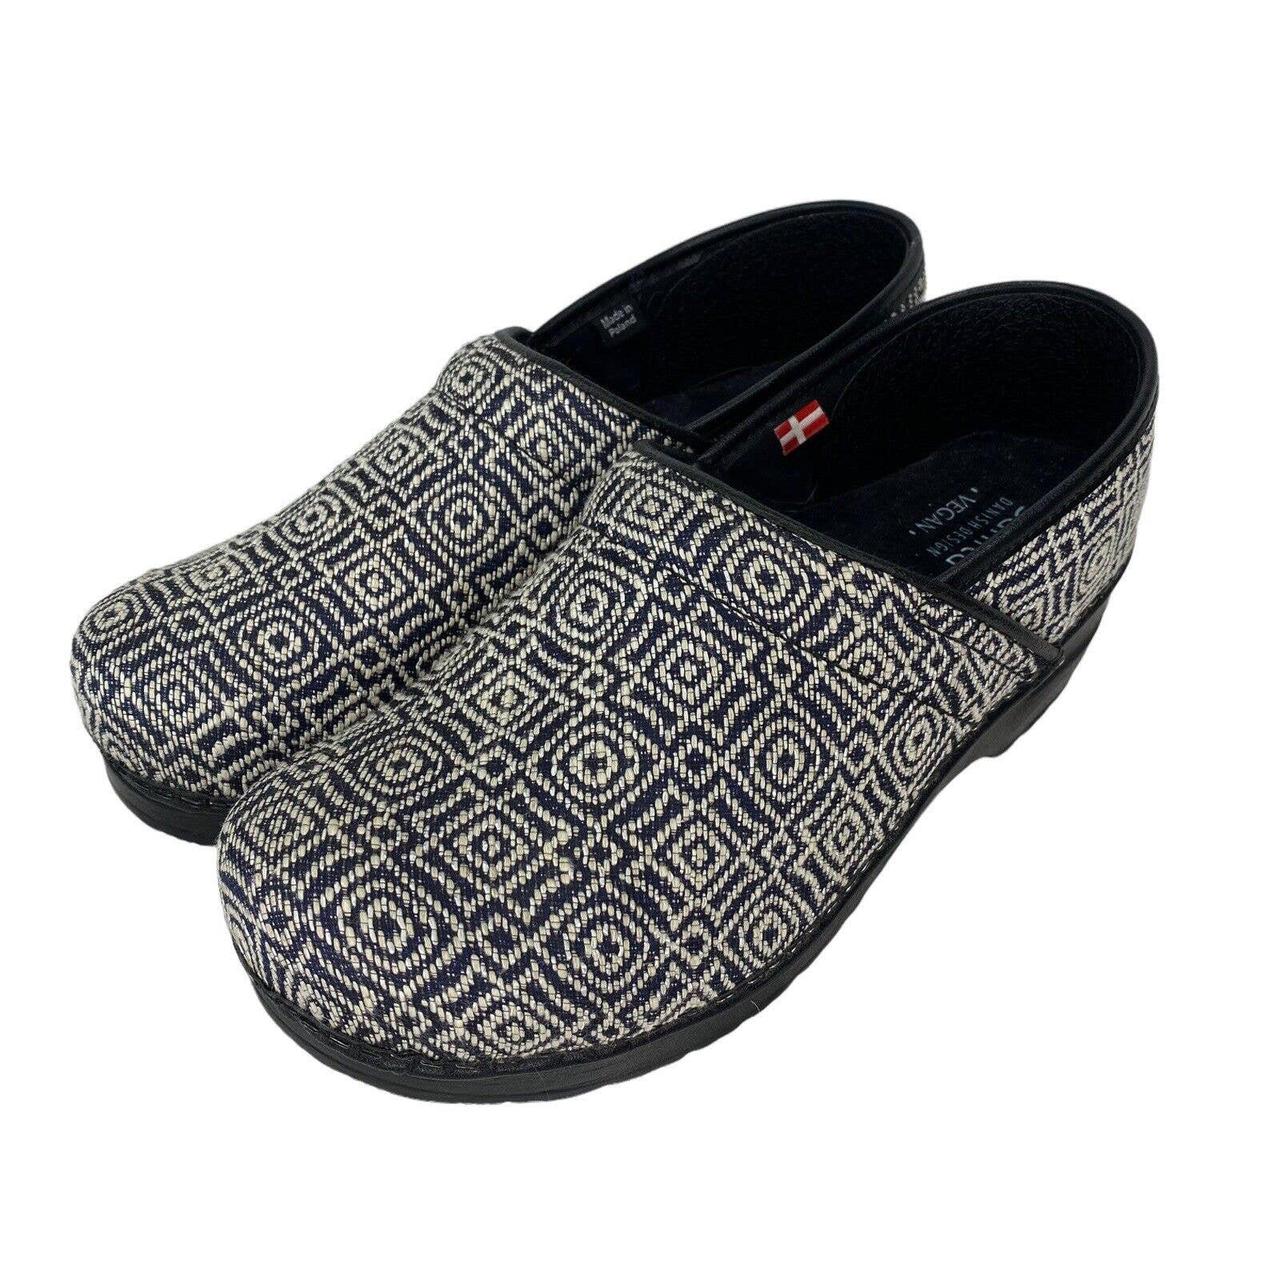 Product Image 1 - These Sanita clogs are in